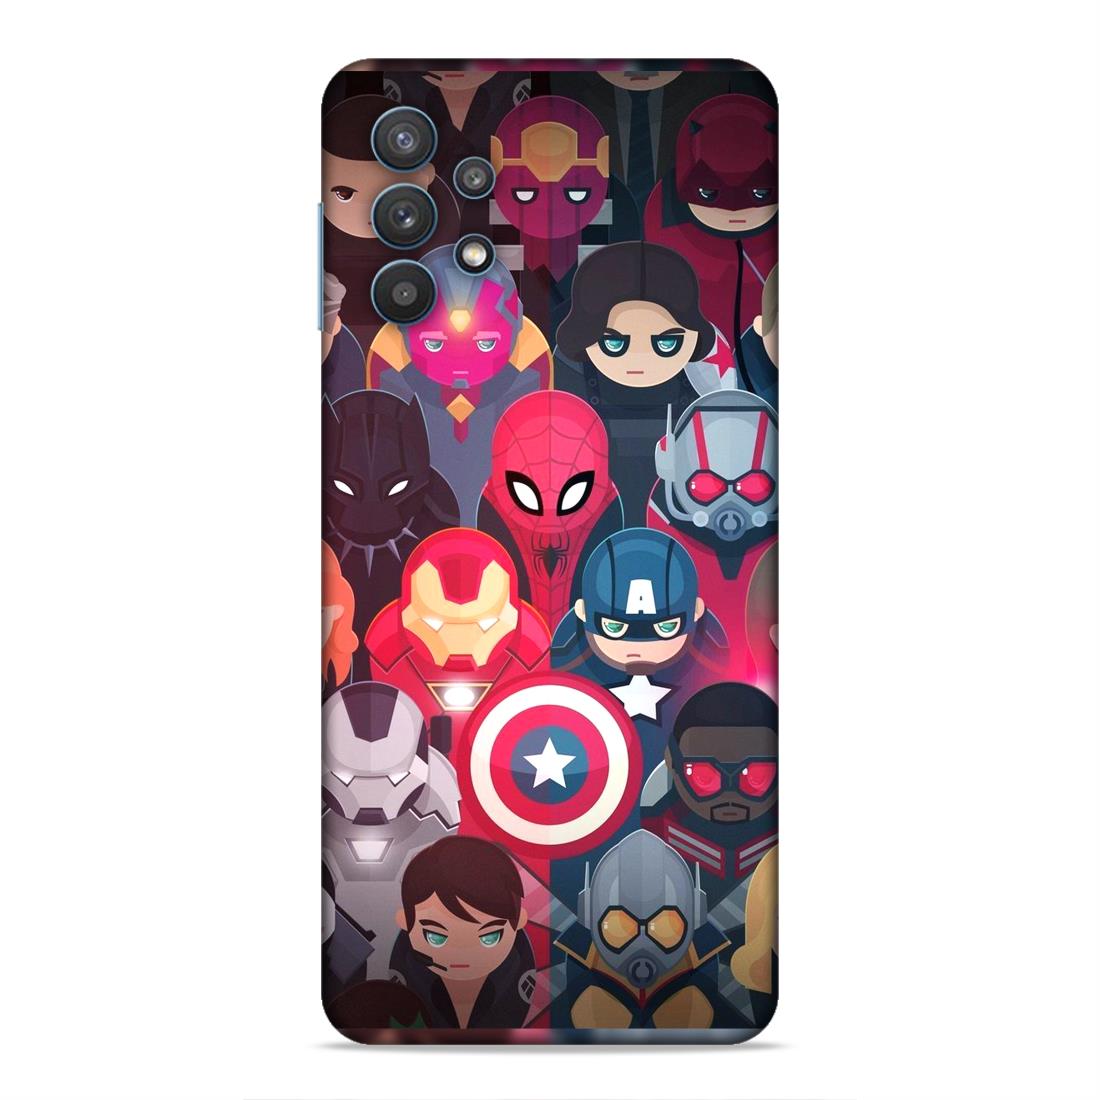 Avenger Heroes Hard Back Case For Samsung Galaxy A32 5G / M32 5G